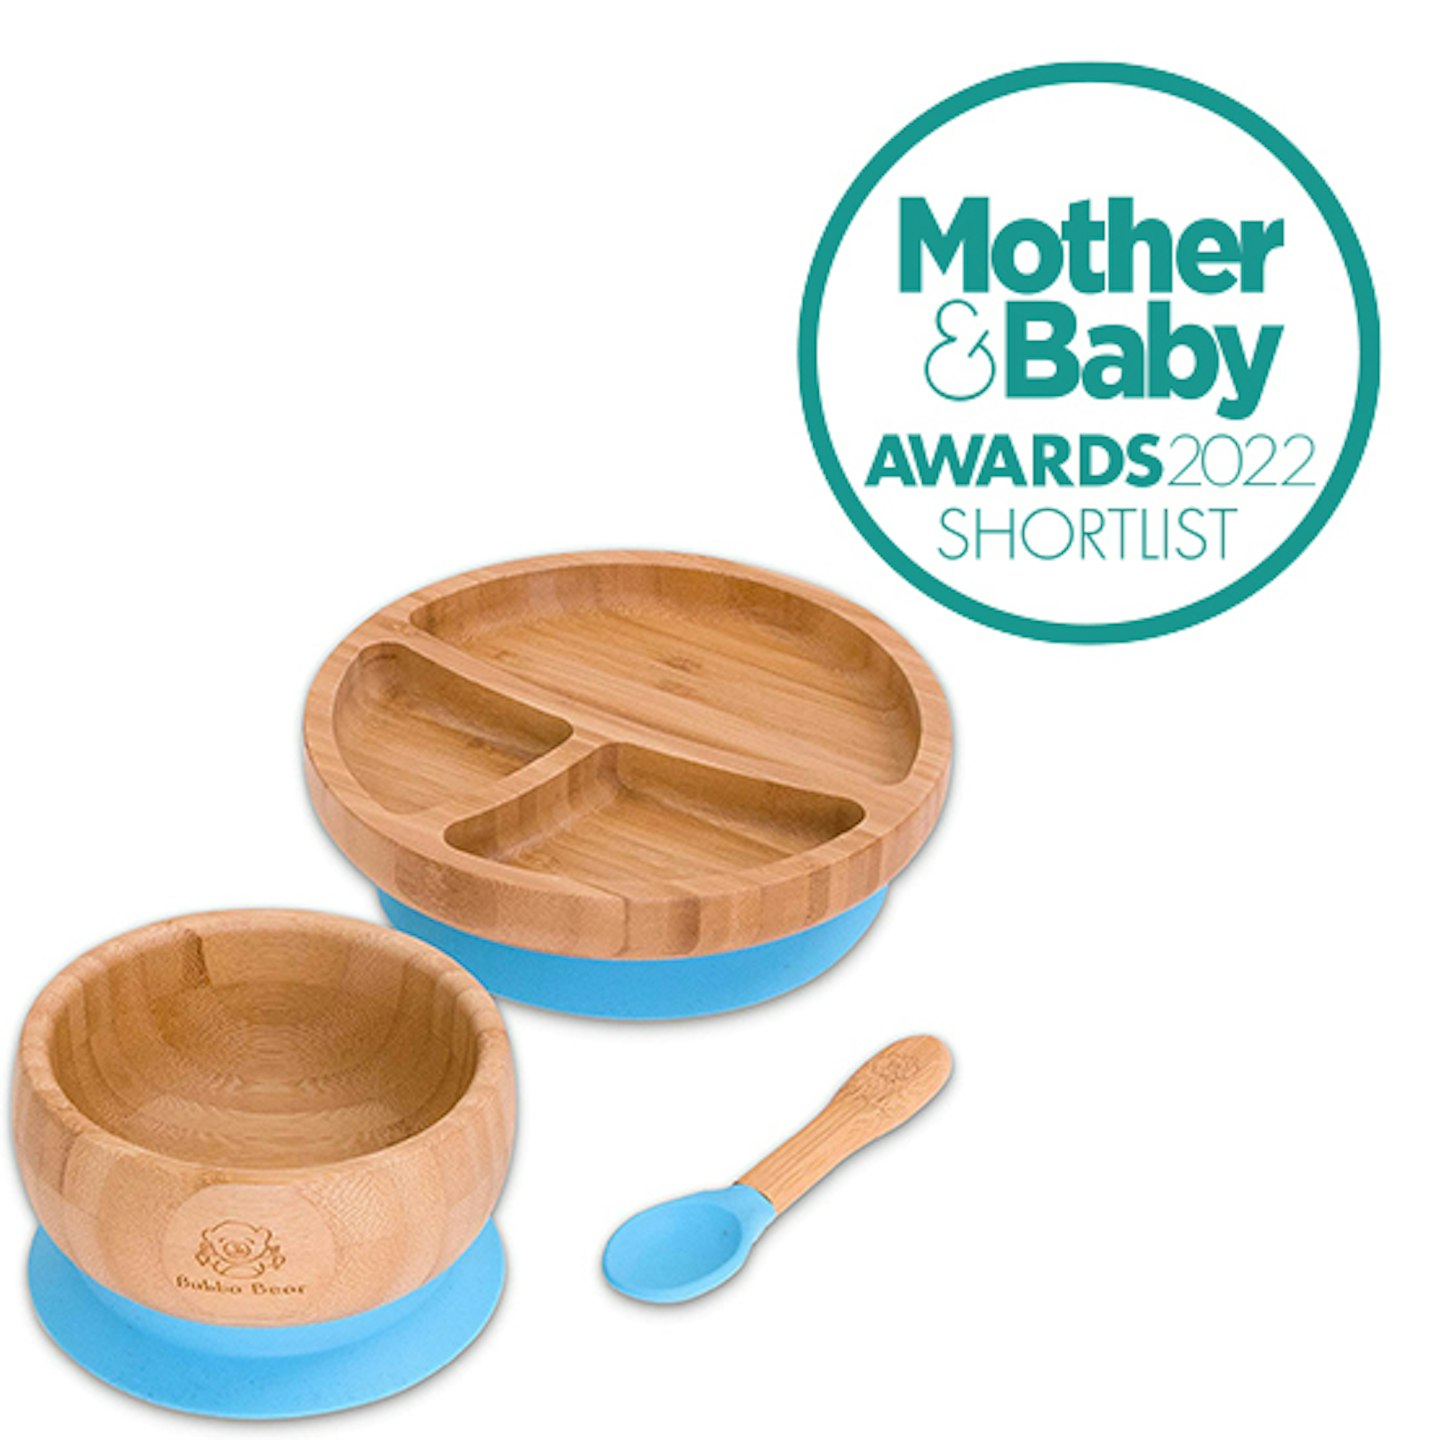 Bubba Bear - Sustainable Baby Weaning Plate & Bowl Sets with Bibs